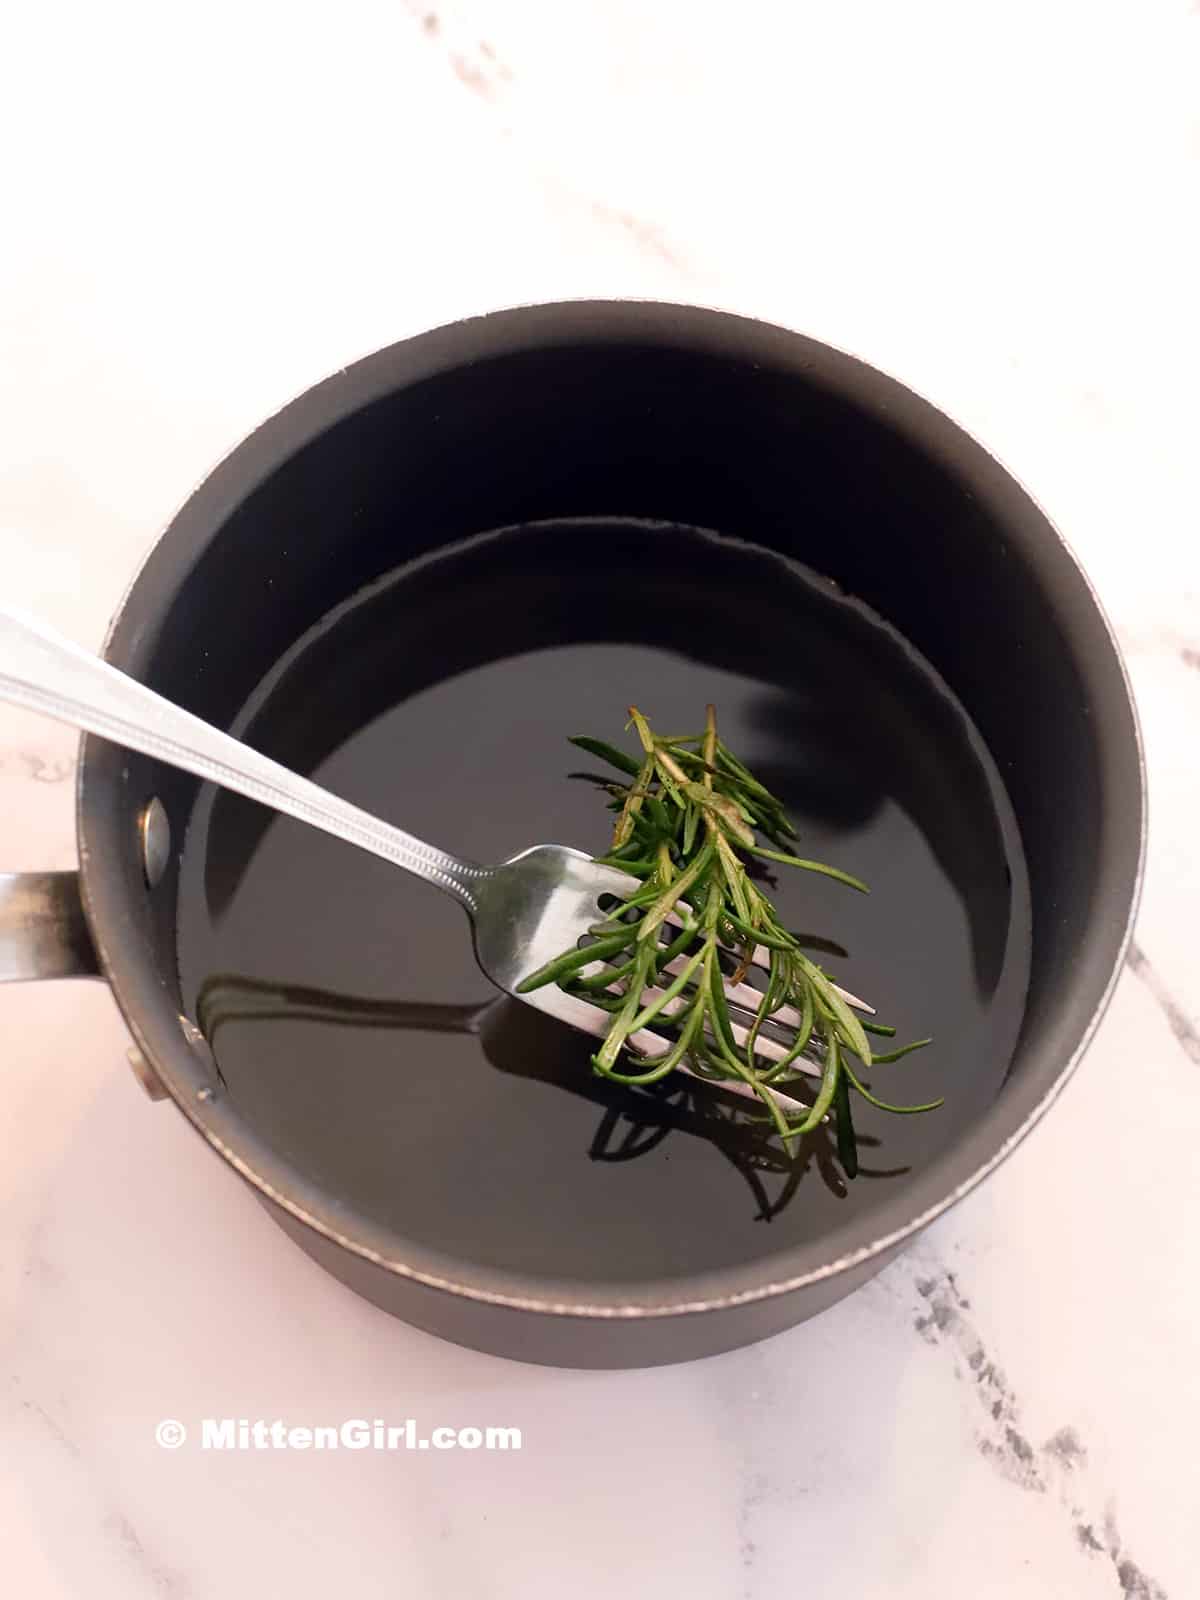 Sprigs of rosemary being lifted out of a pot by a fork.